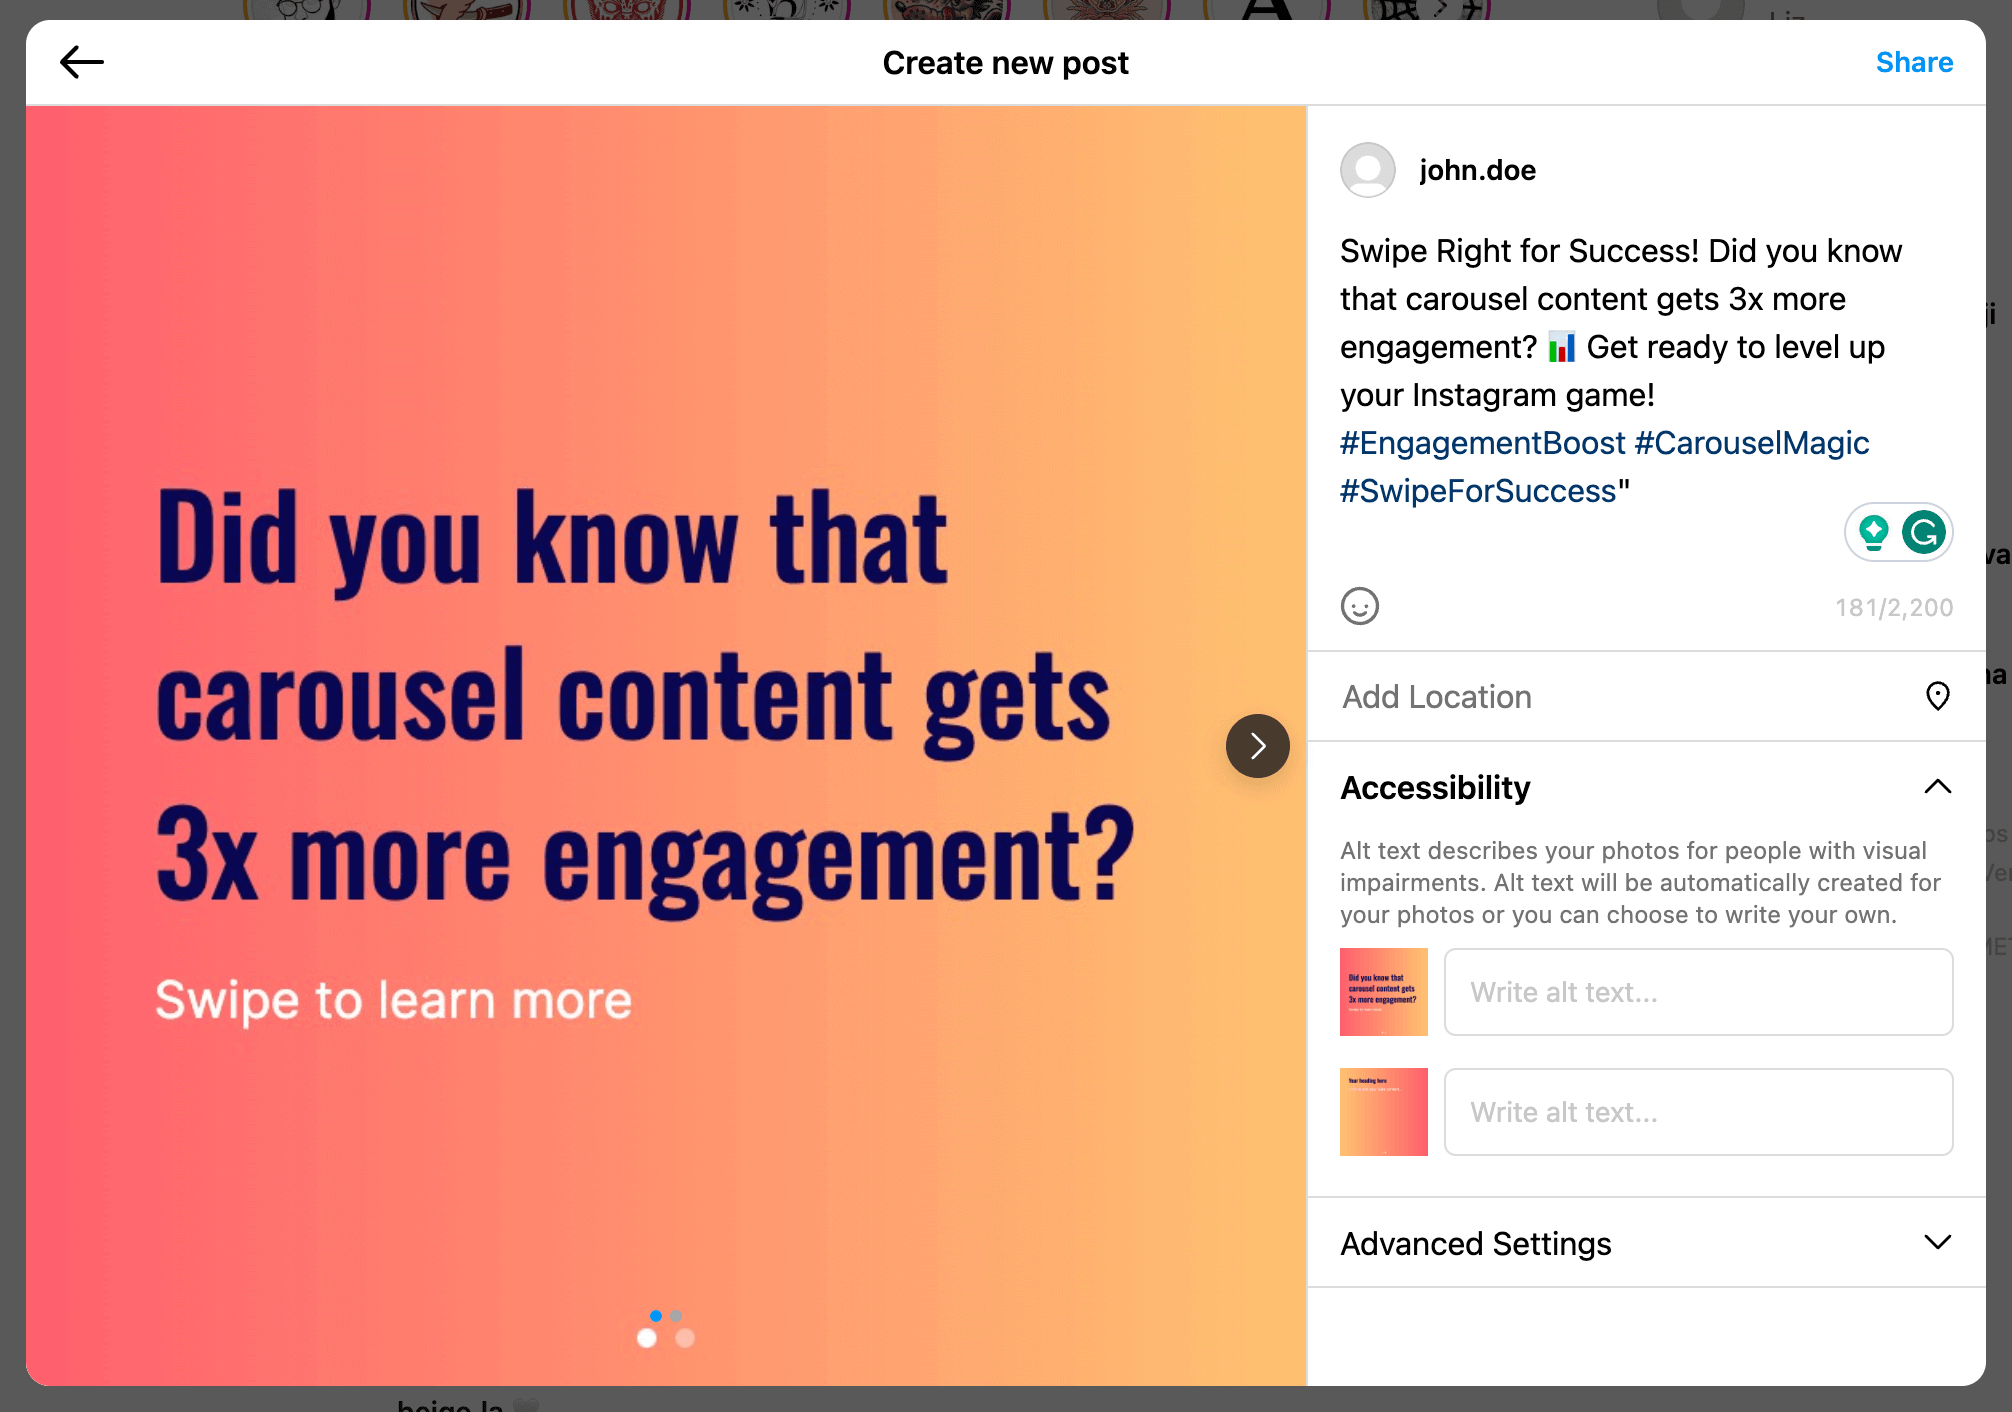 How to post a Instagram Carousel: Step 7 - Add details